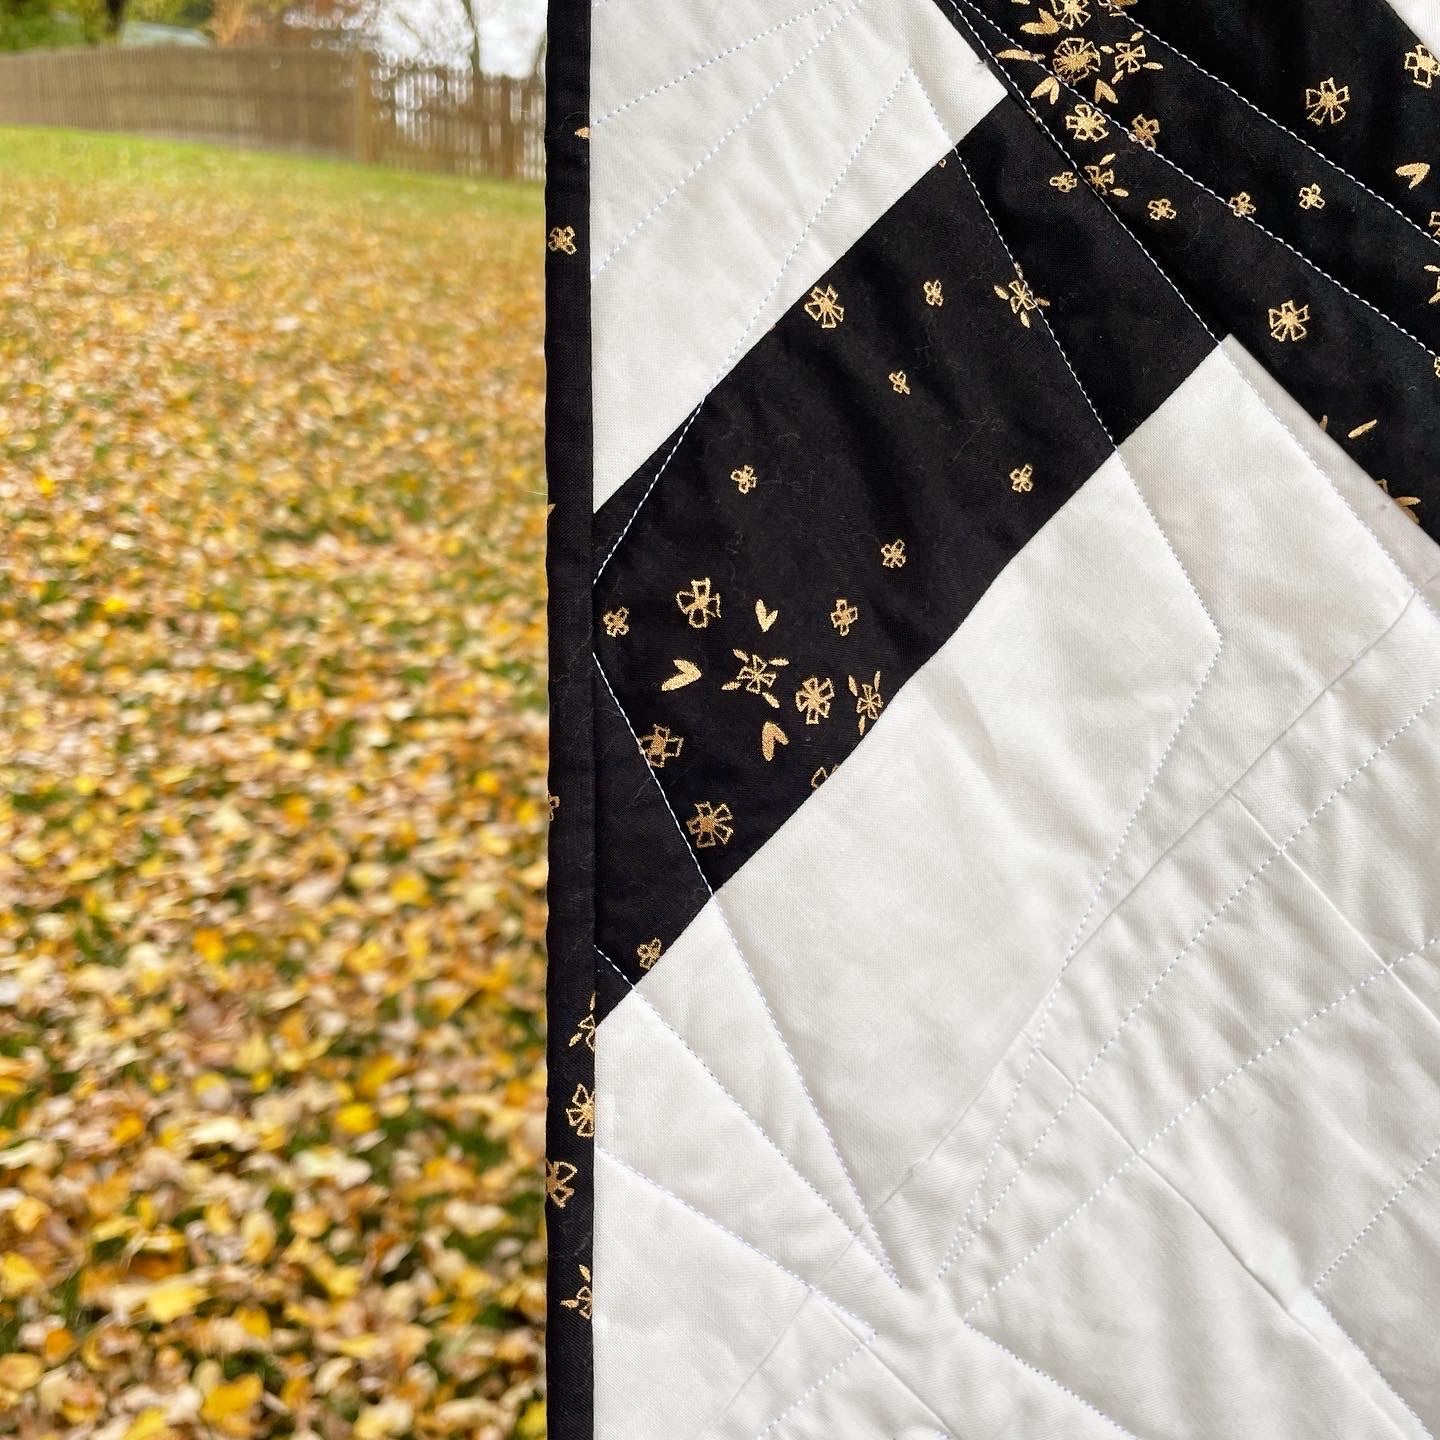 Modern Black and White Homecoming Quilt